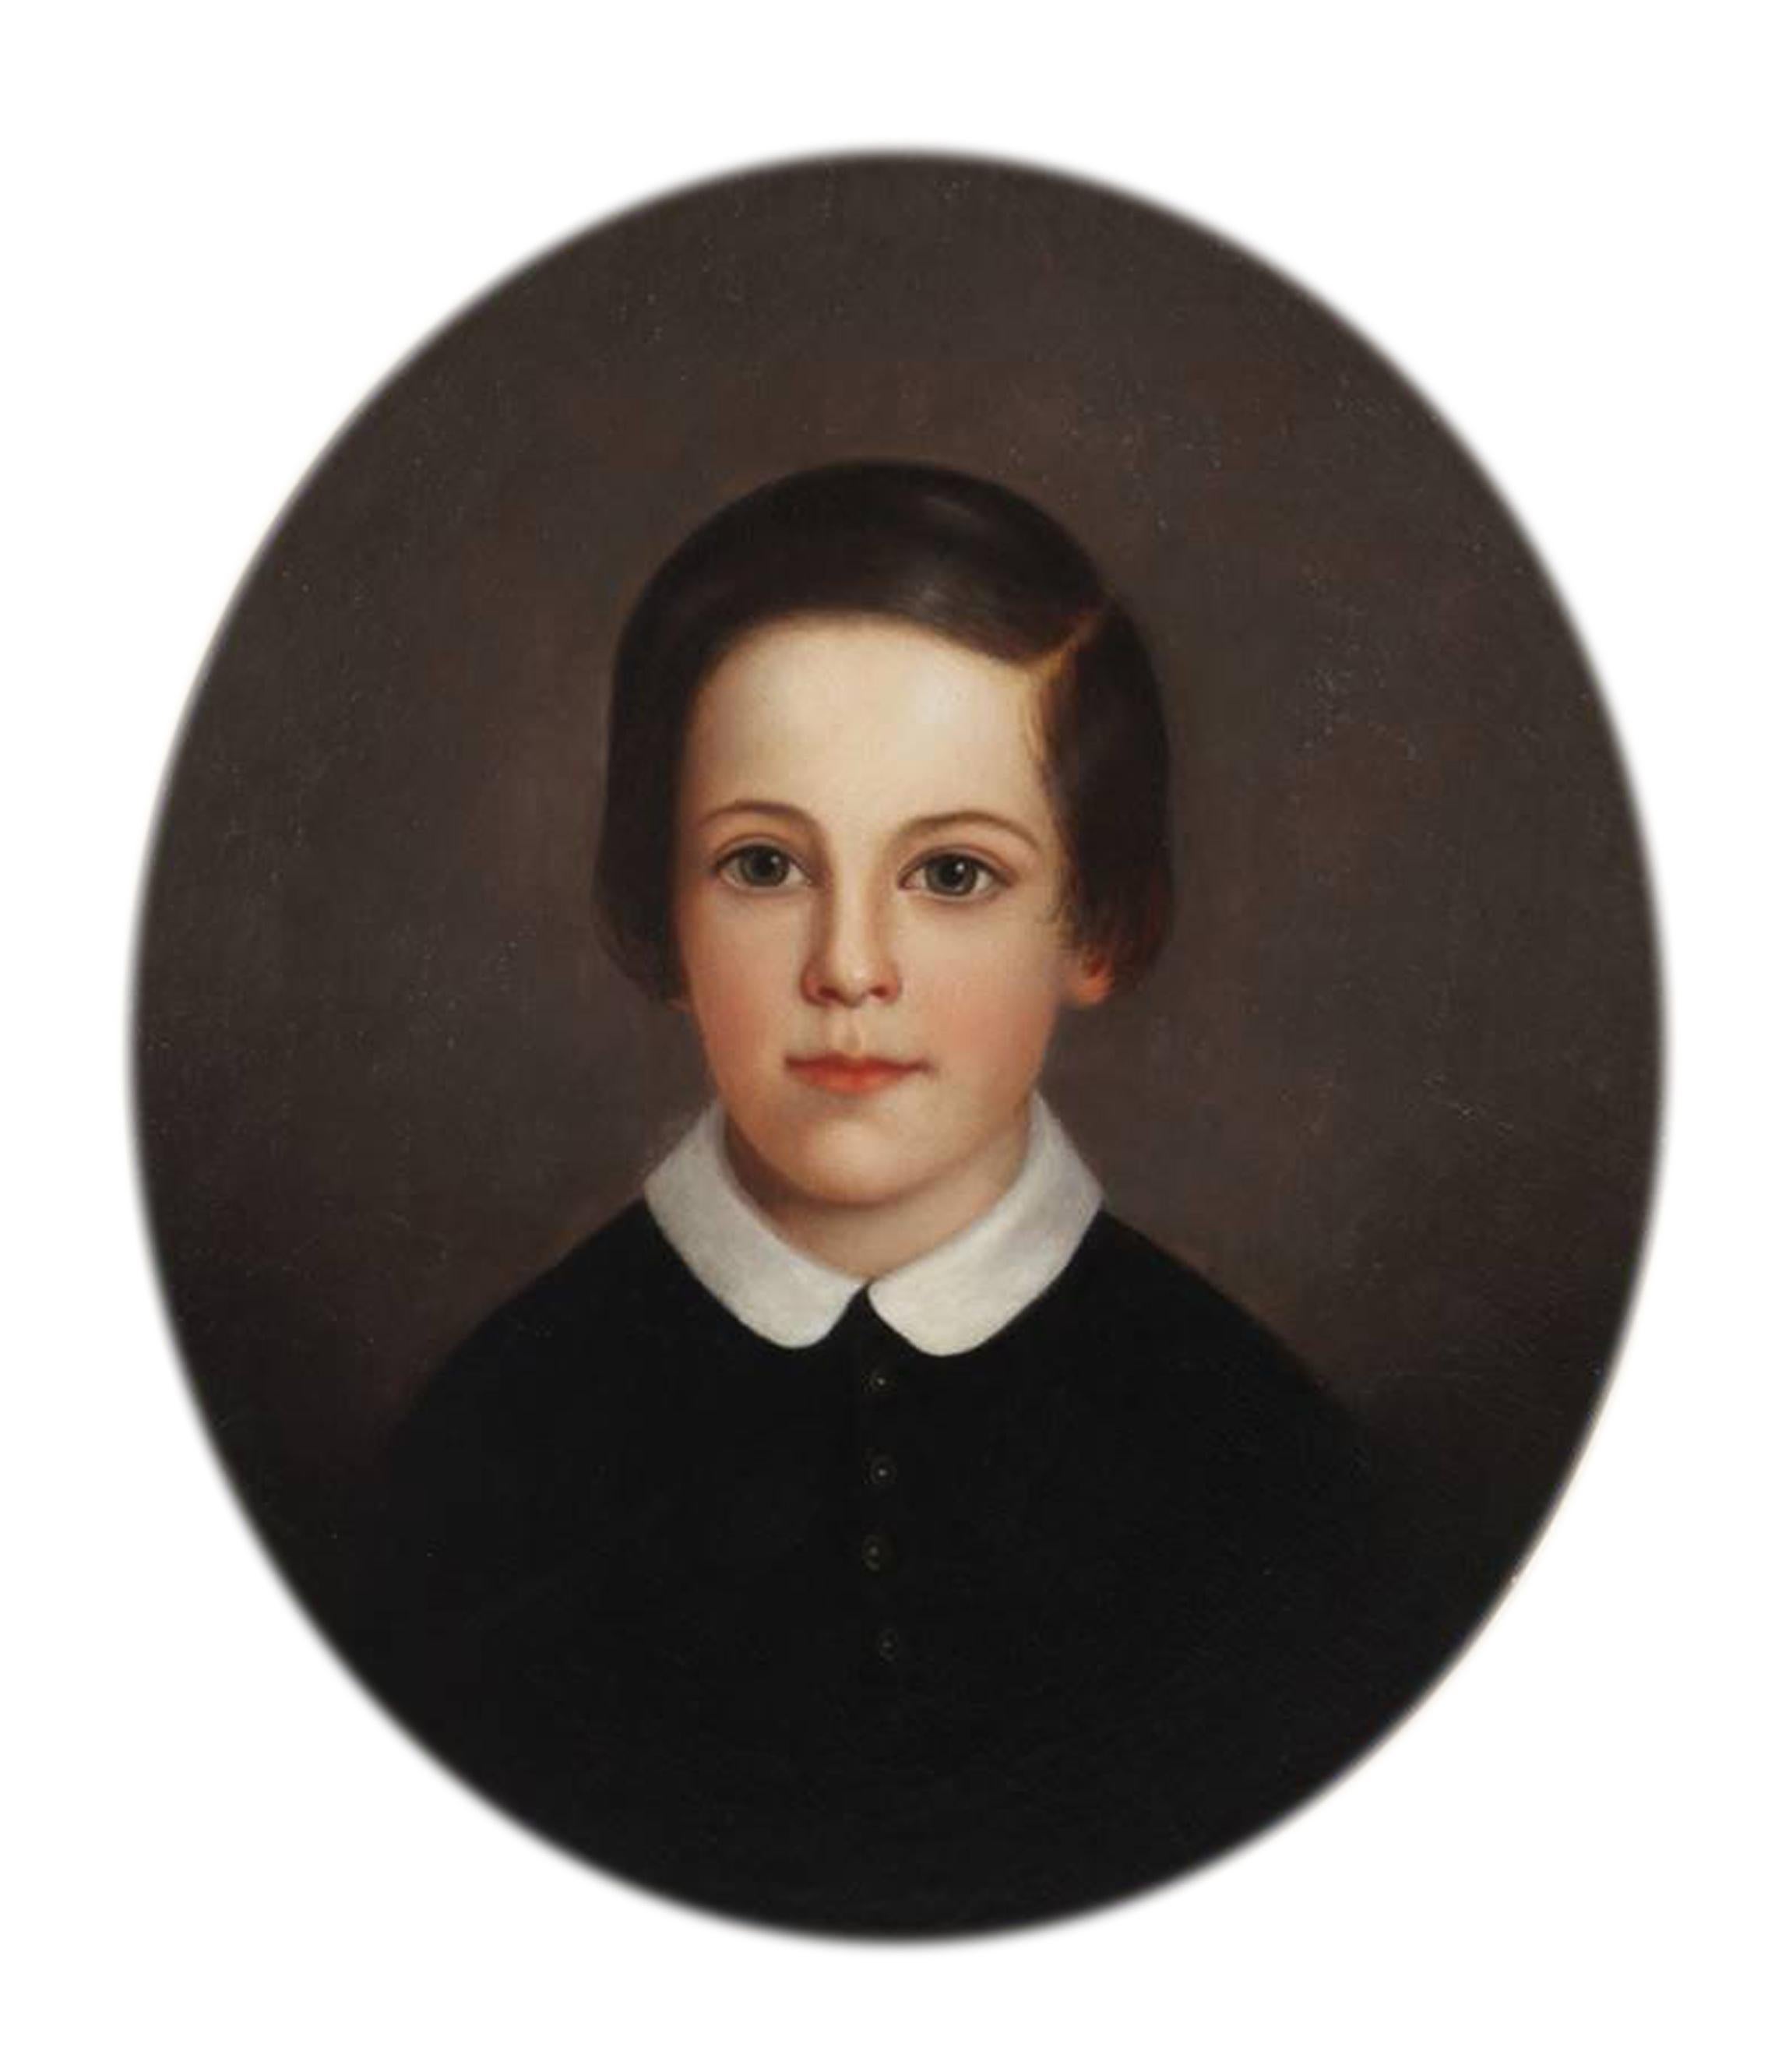 Mary Jane Peale (1827-1902)
Albert Peale, Age 9, 1858 
Oil on canvas laid on panel 
20 1/8 x 17 ½ inches

Mary Jane Peale was the daughter of Rubens Peale and the niece of Sarah Miriam and Anna Claypoole Peale. She inherited the family talent and